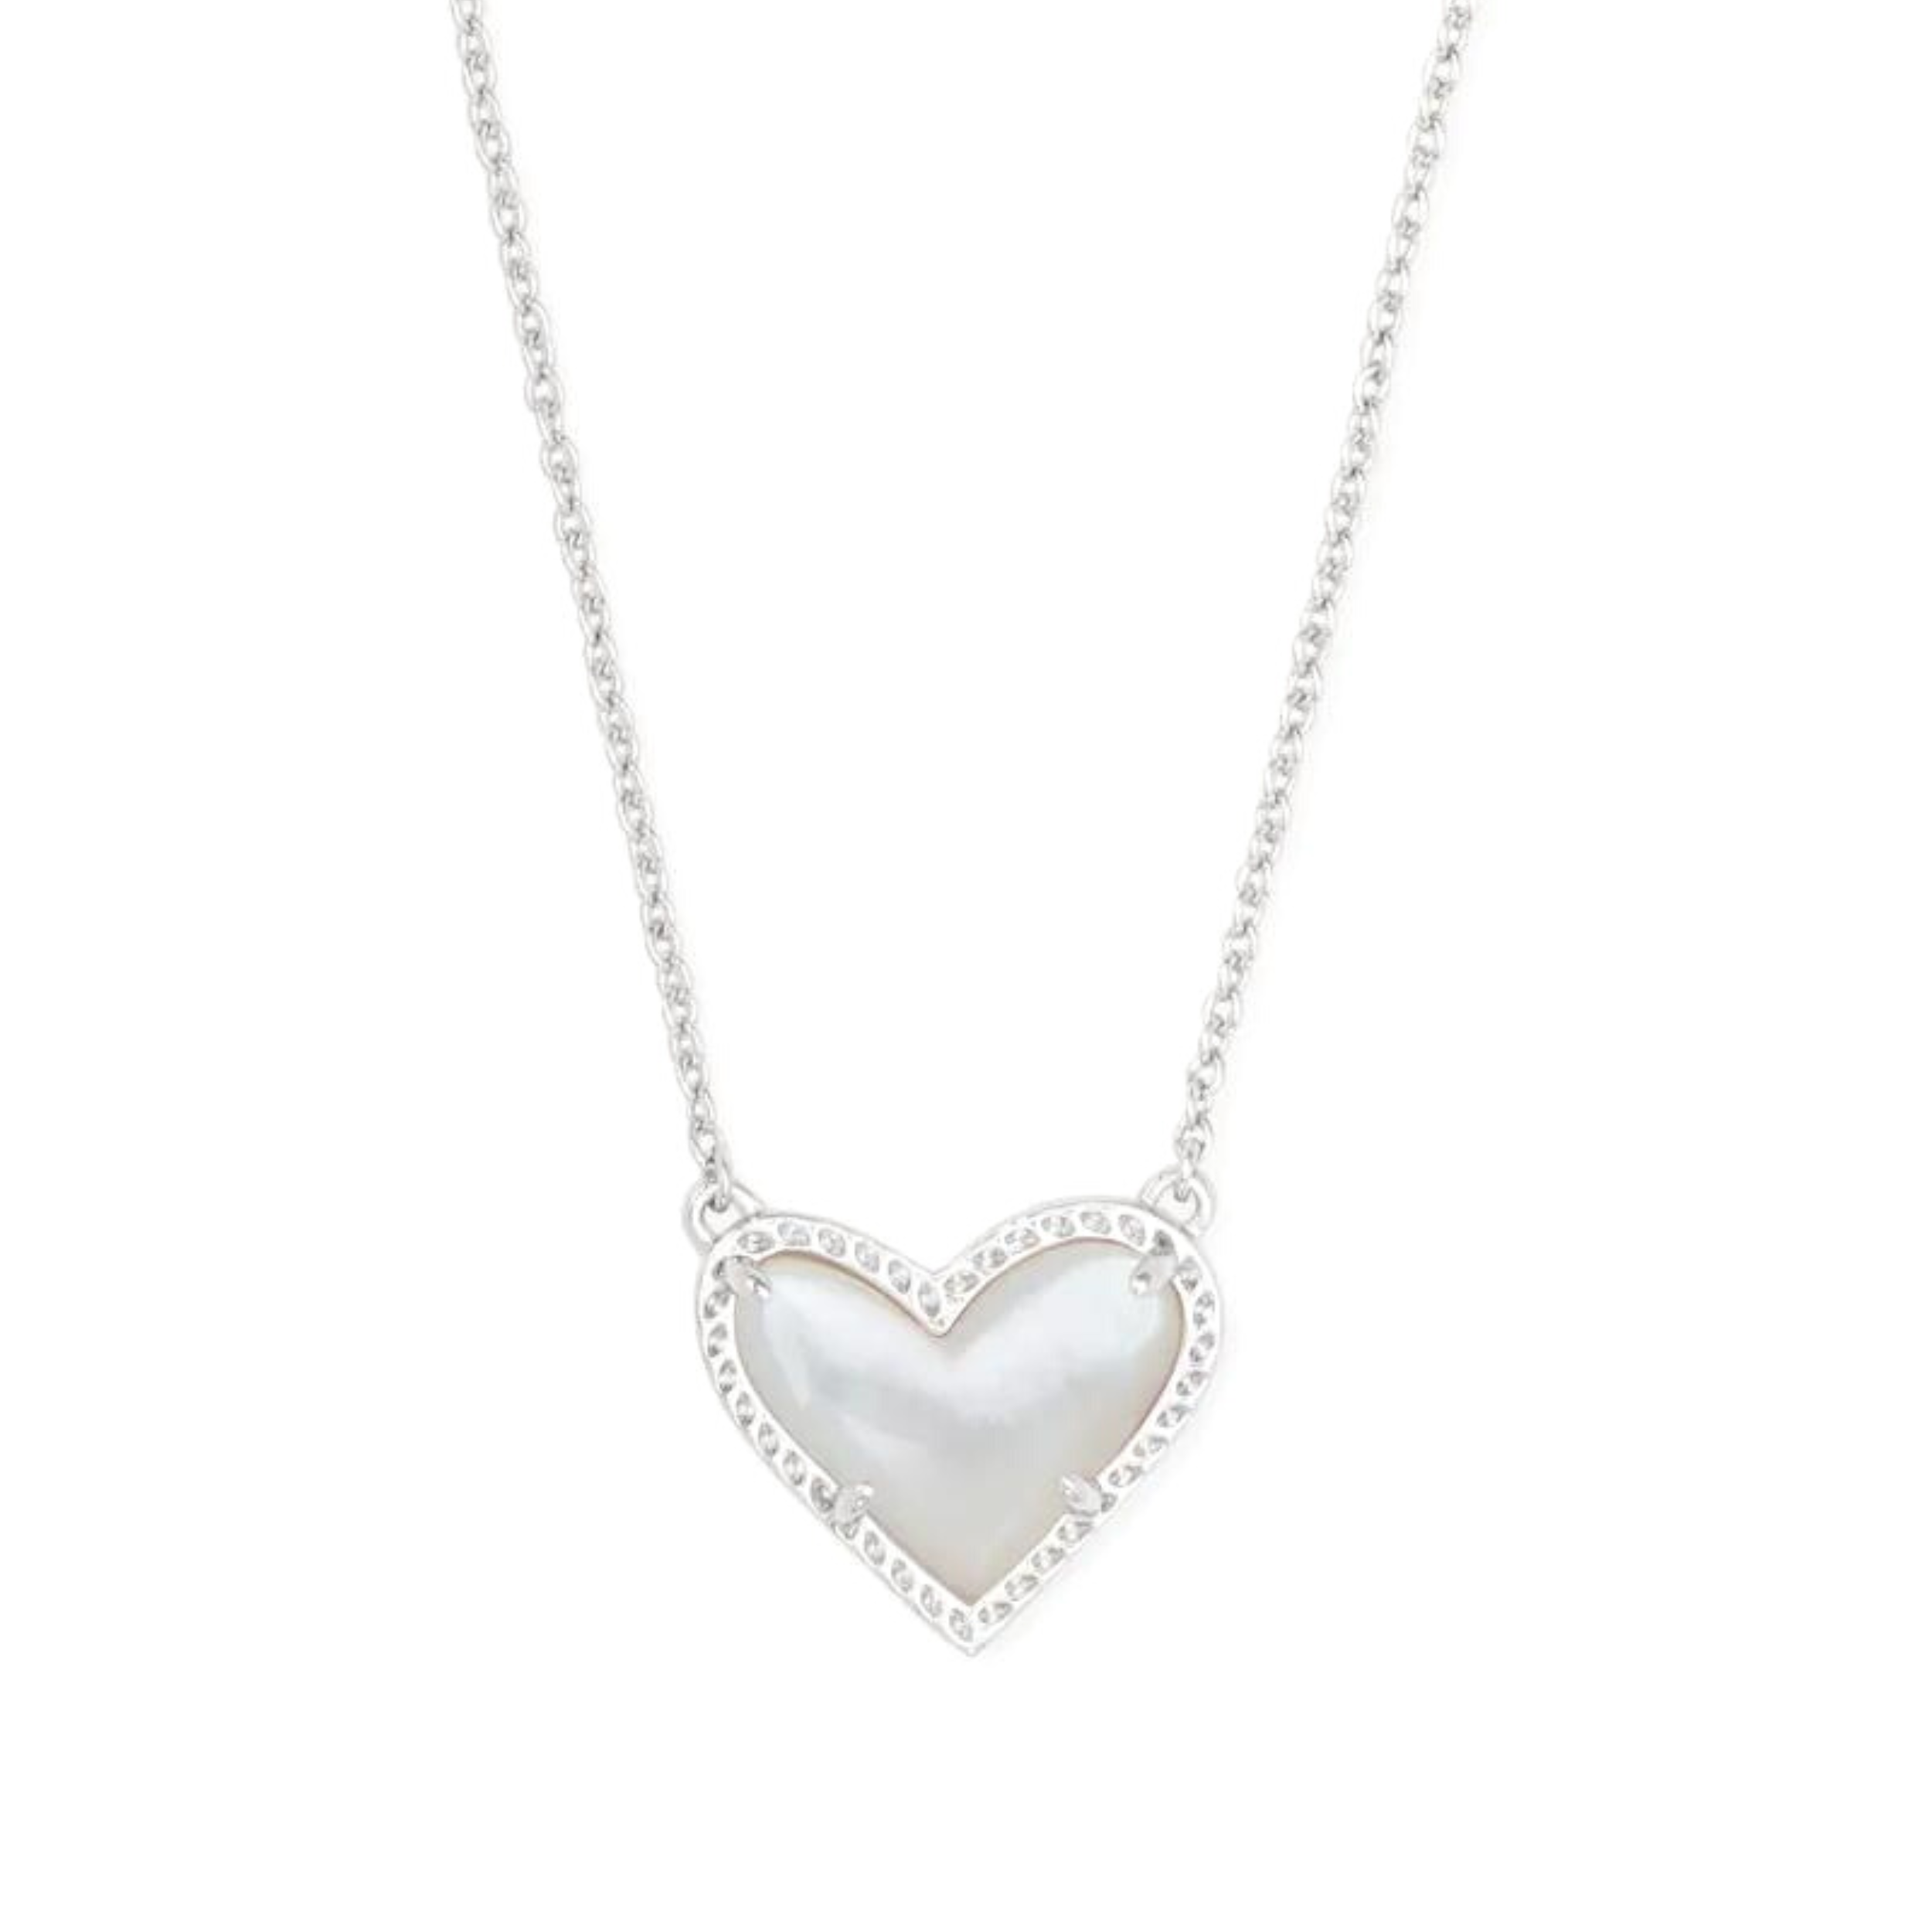 Kendra Scott | Ari Heart Silver Pendant Necklace in Ivory Mother of Pearl